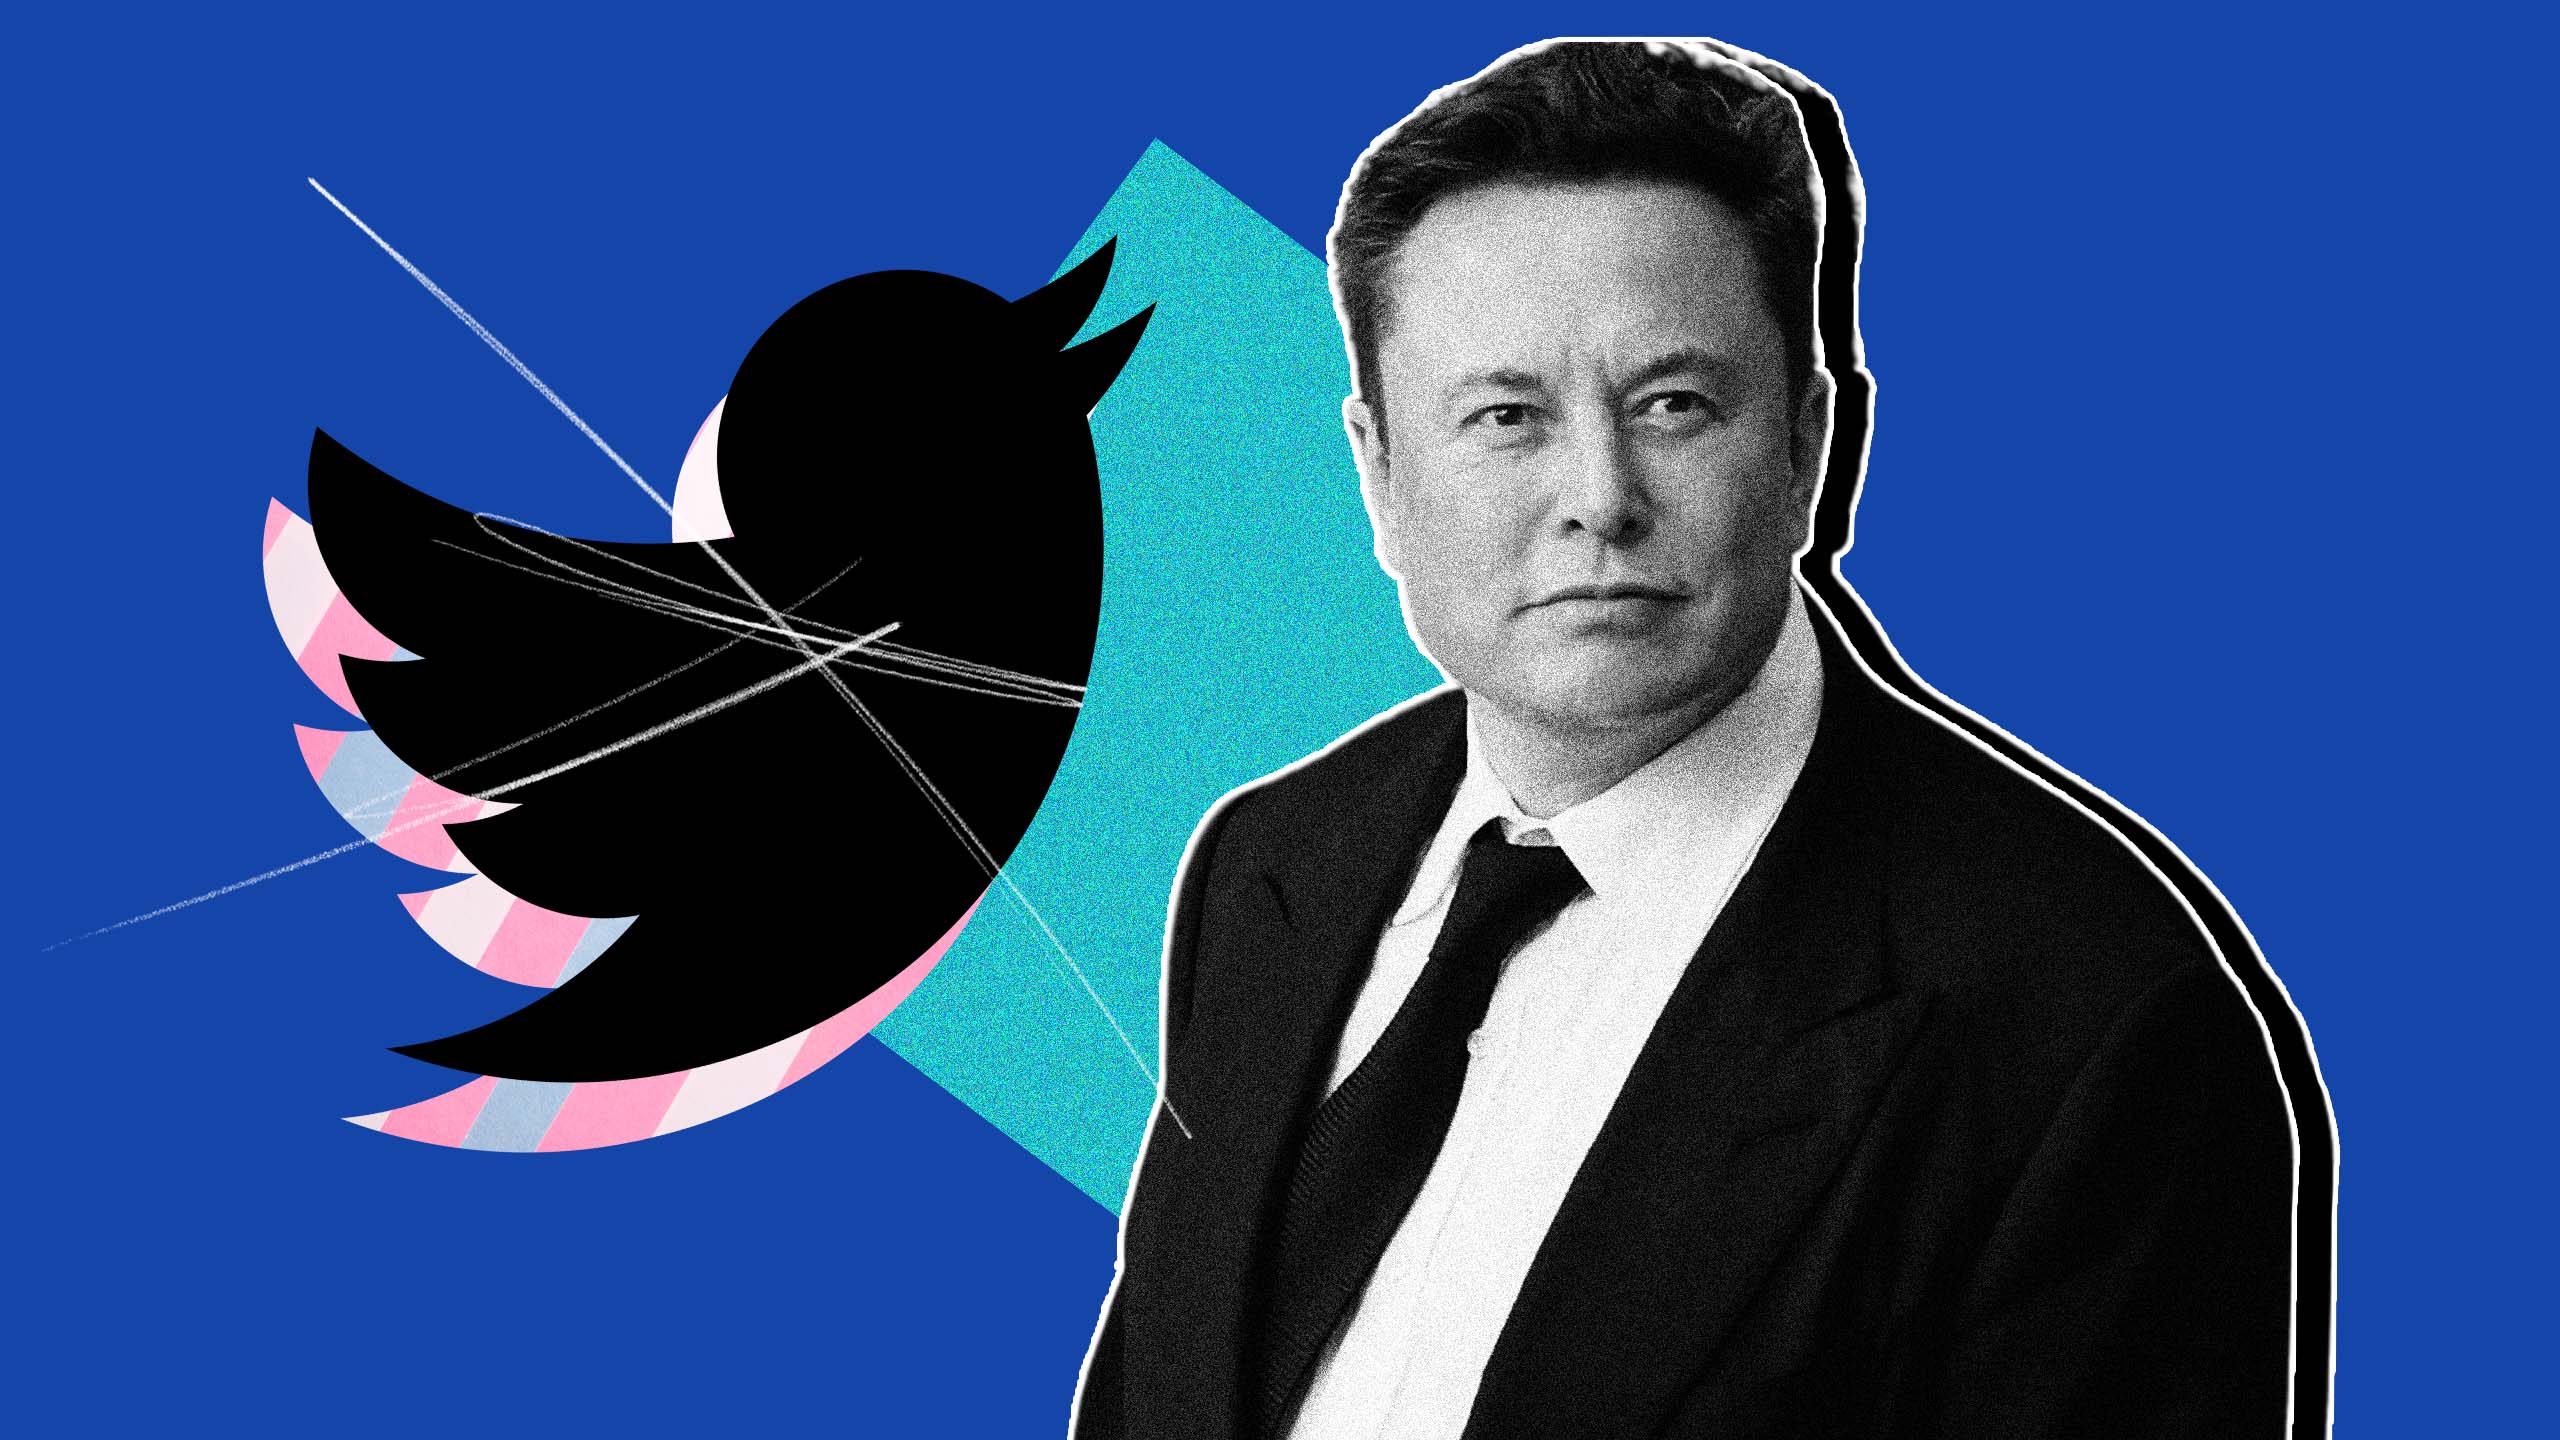 The Twitter logo with a shadow of a trans flag; Elon Musk wearing a blazer, collared shirt and tie